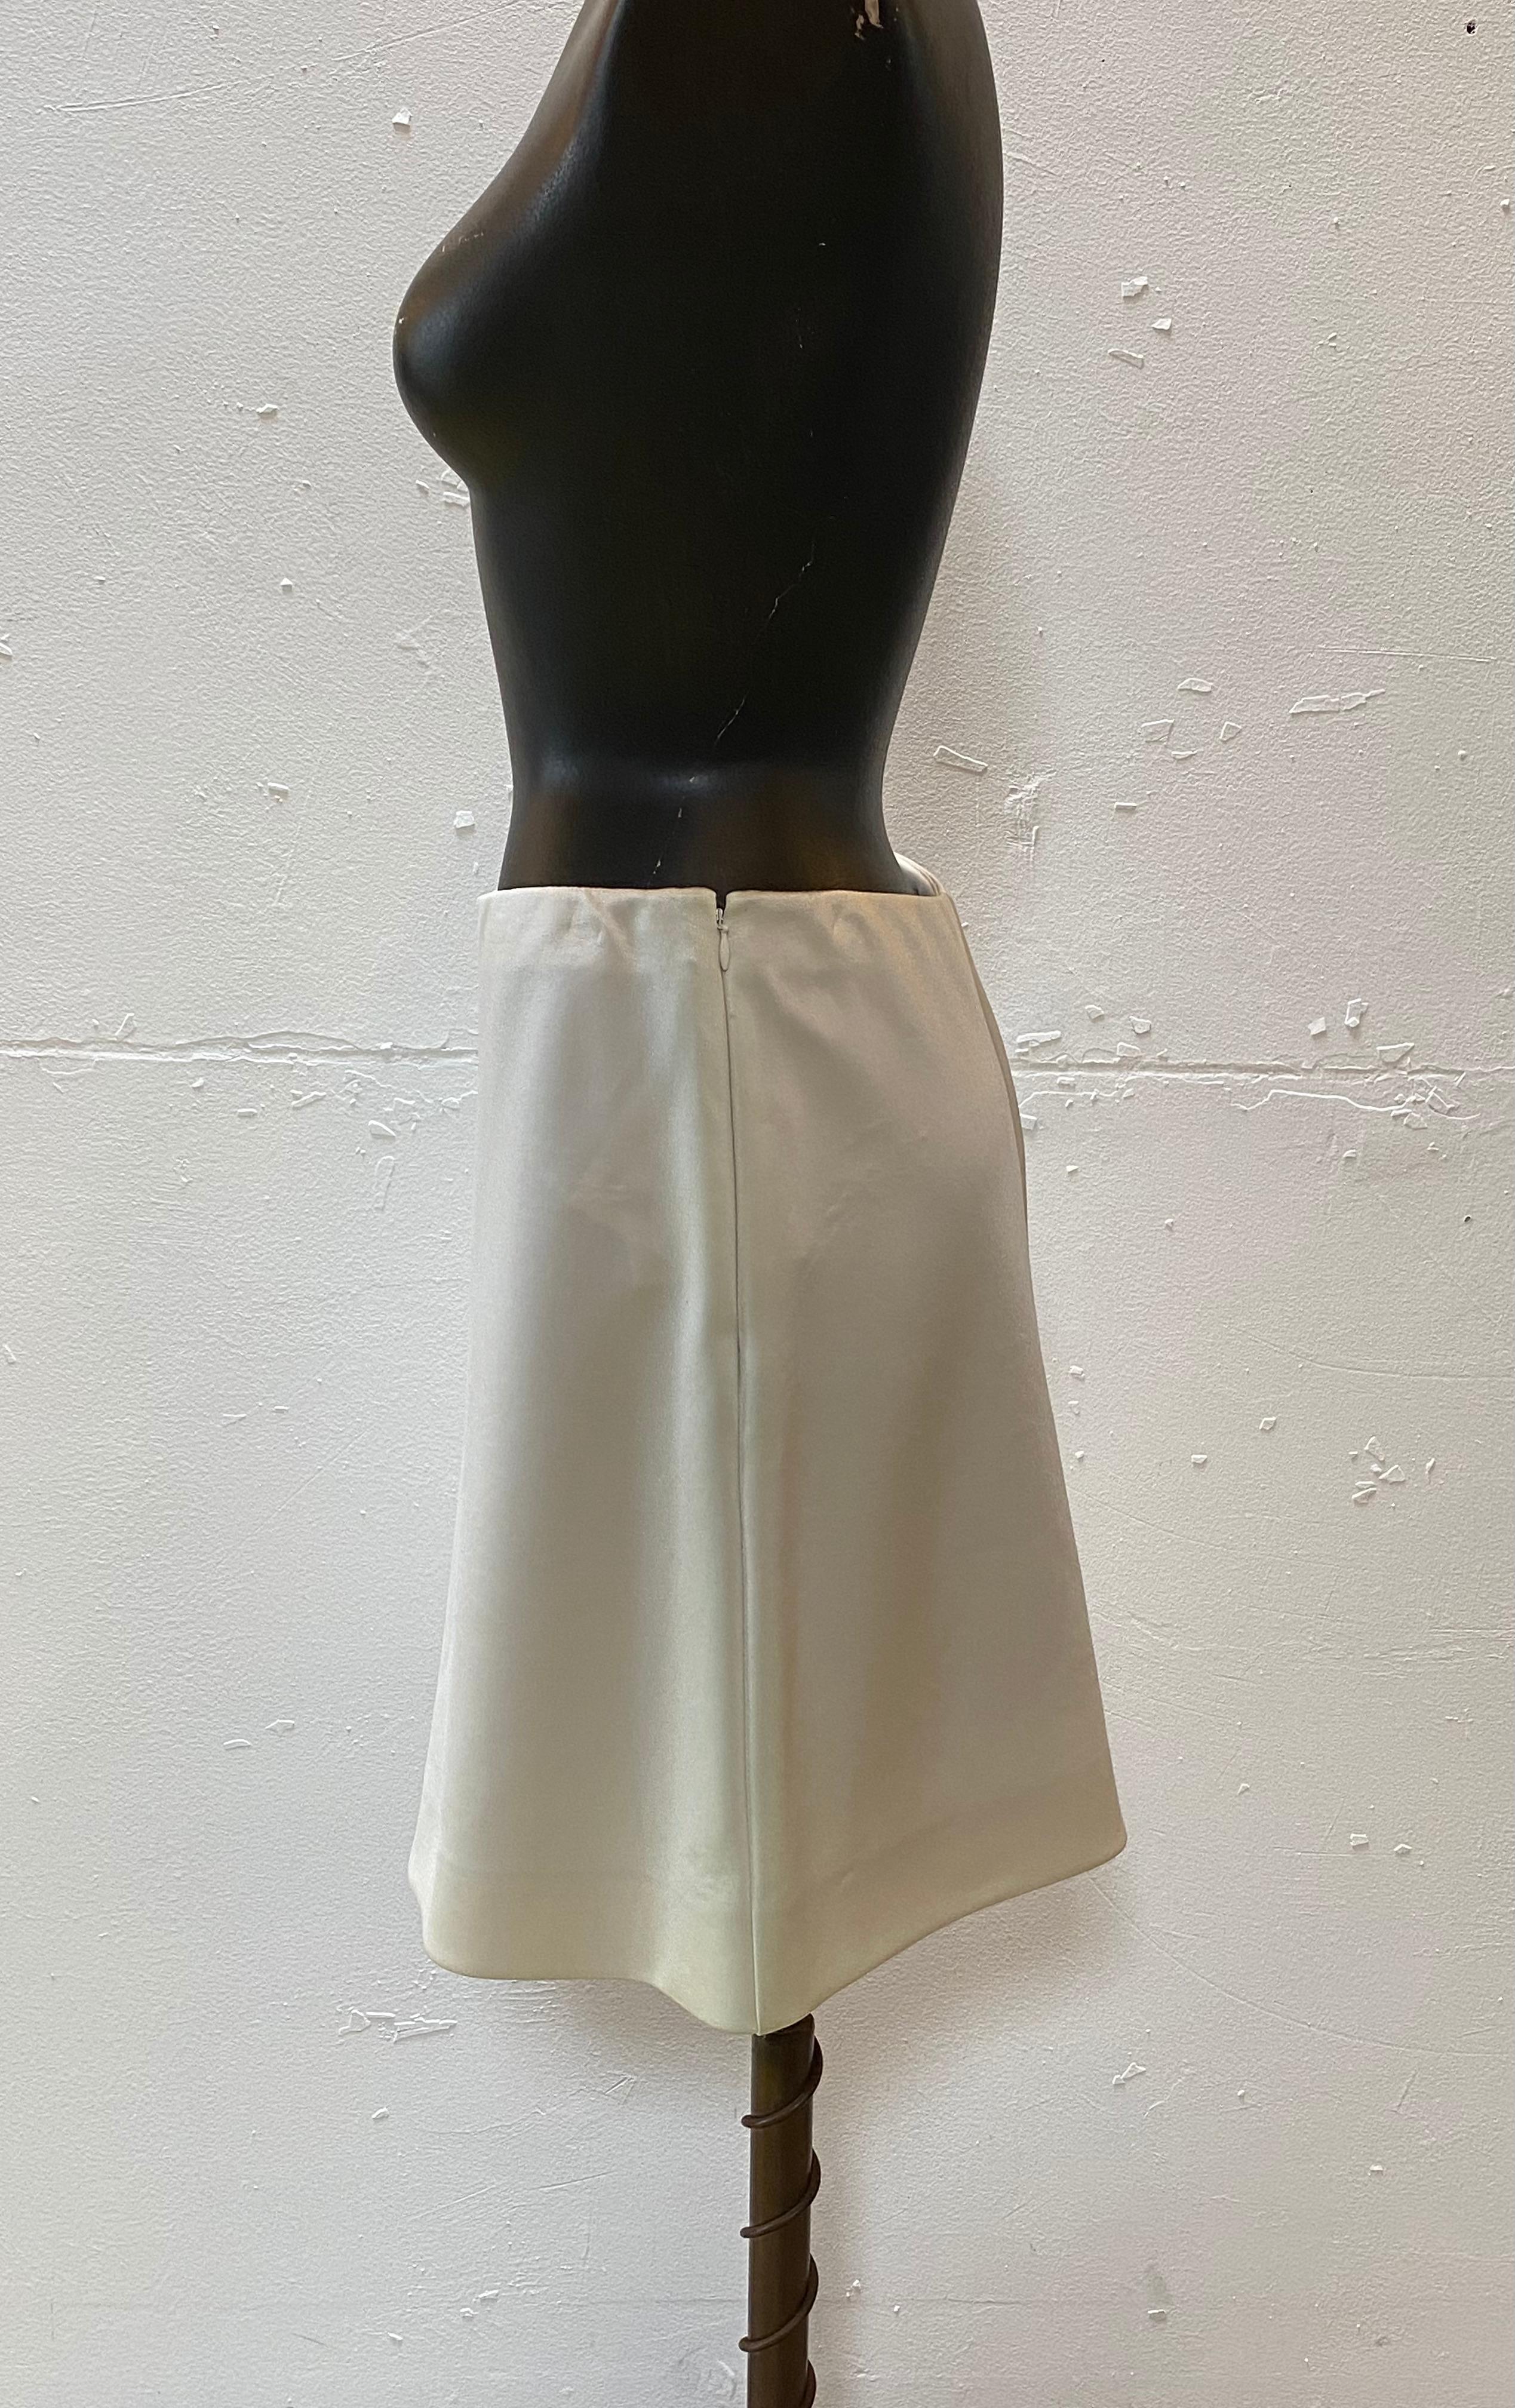 Satiny soft Correges short skirt in milk-color fastens with a side zip. 